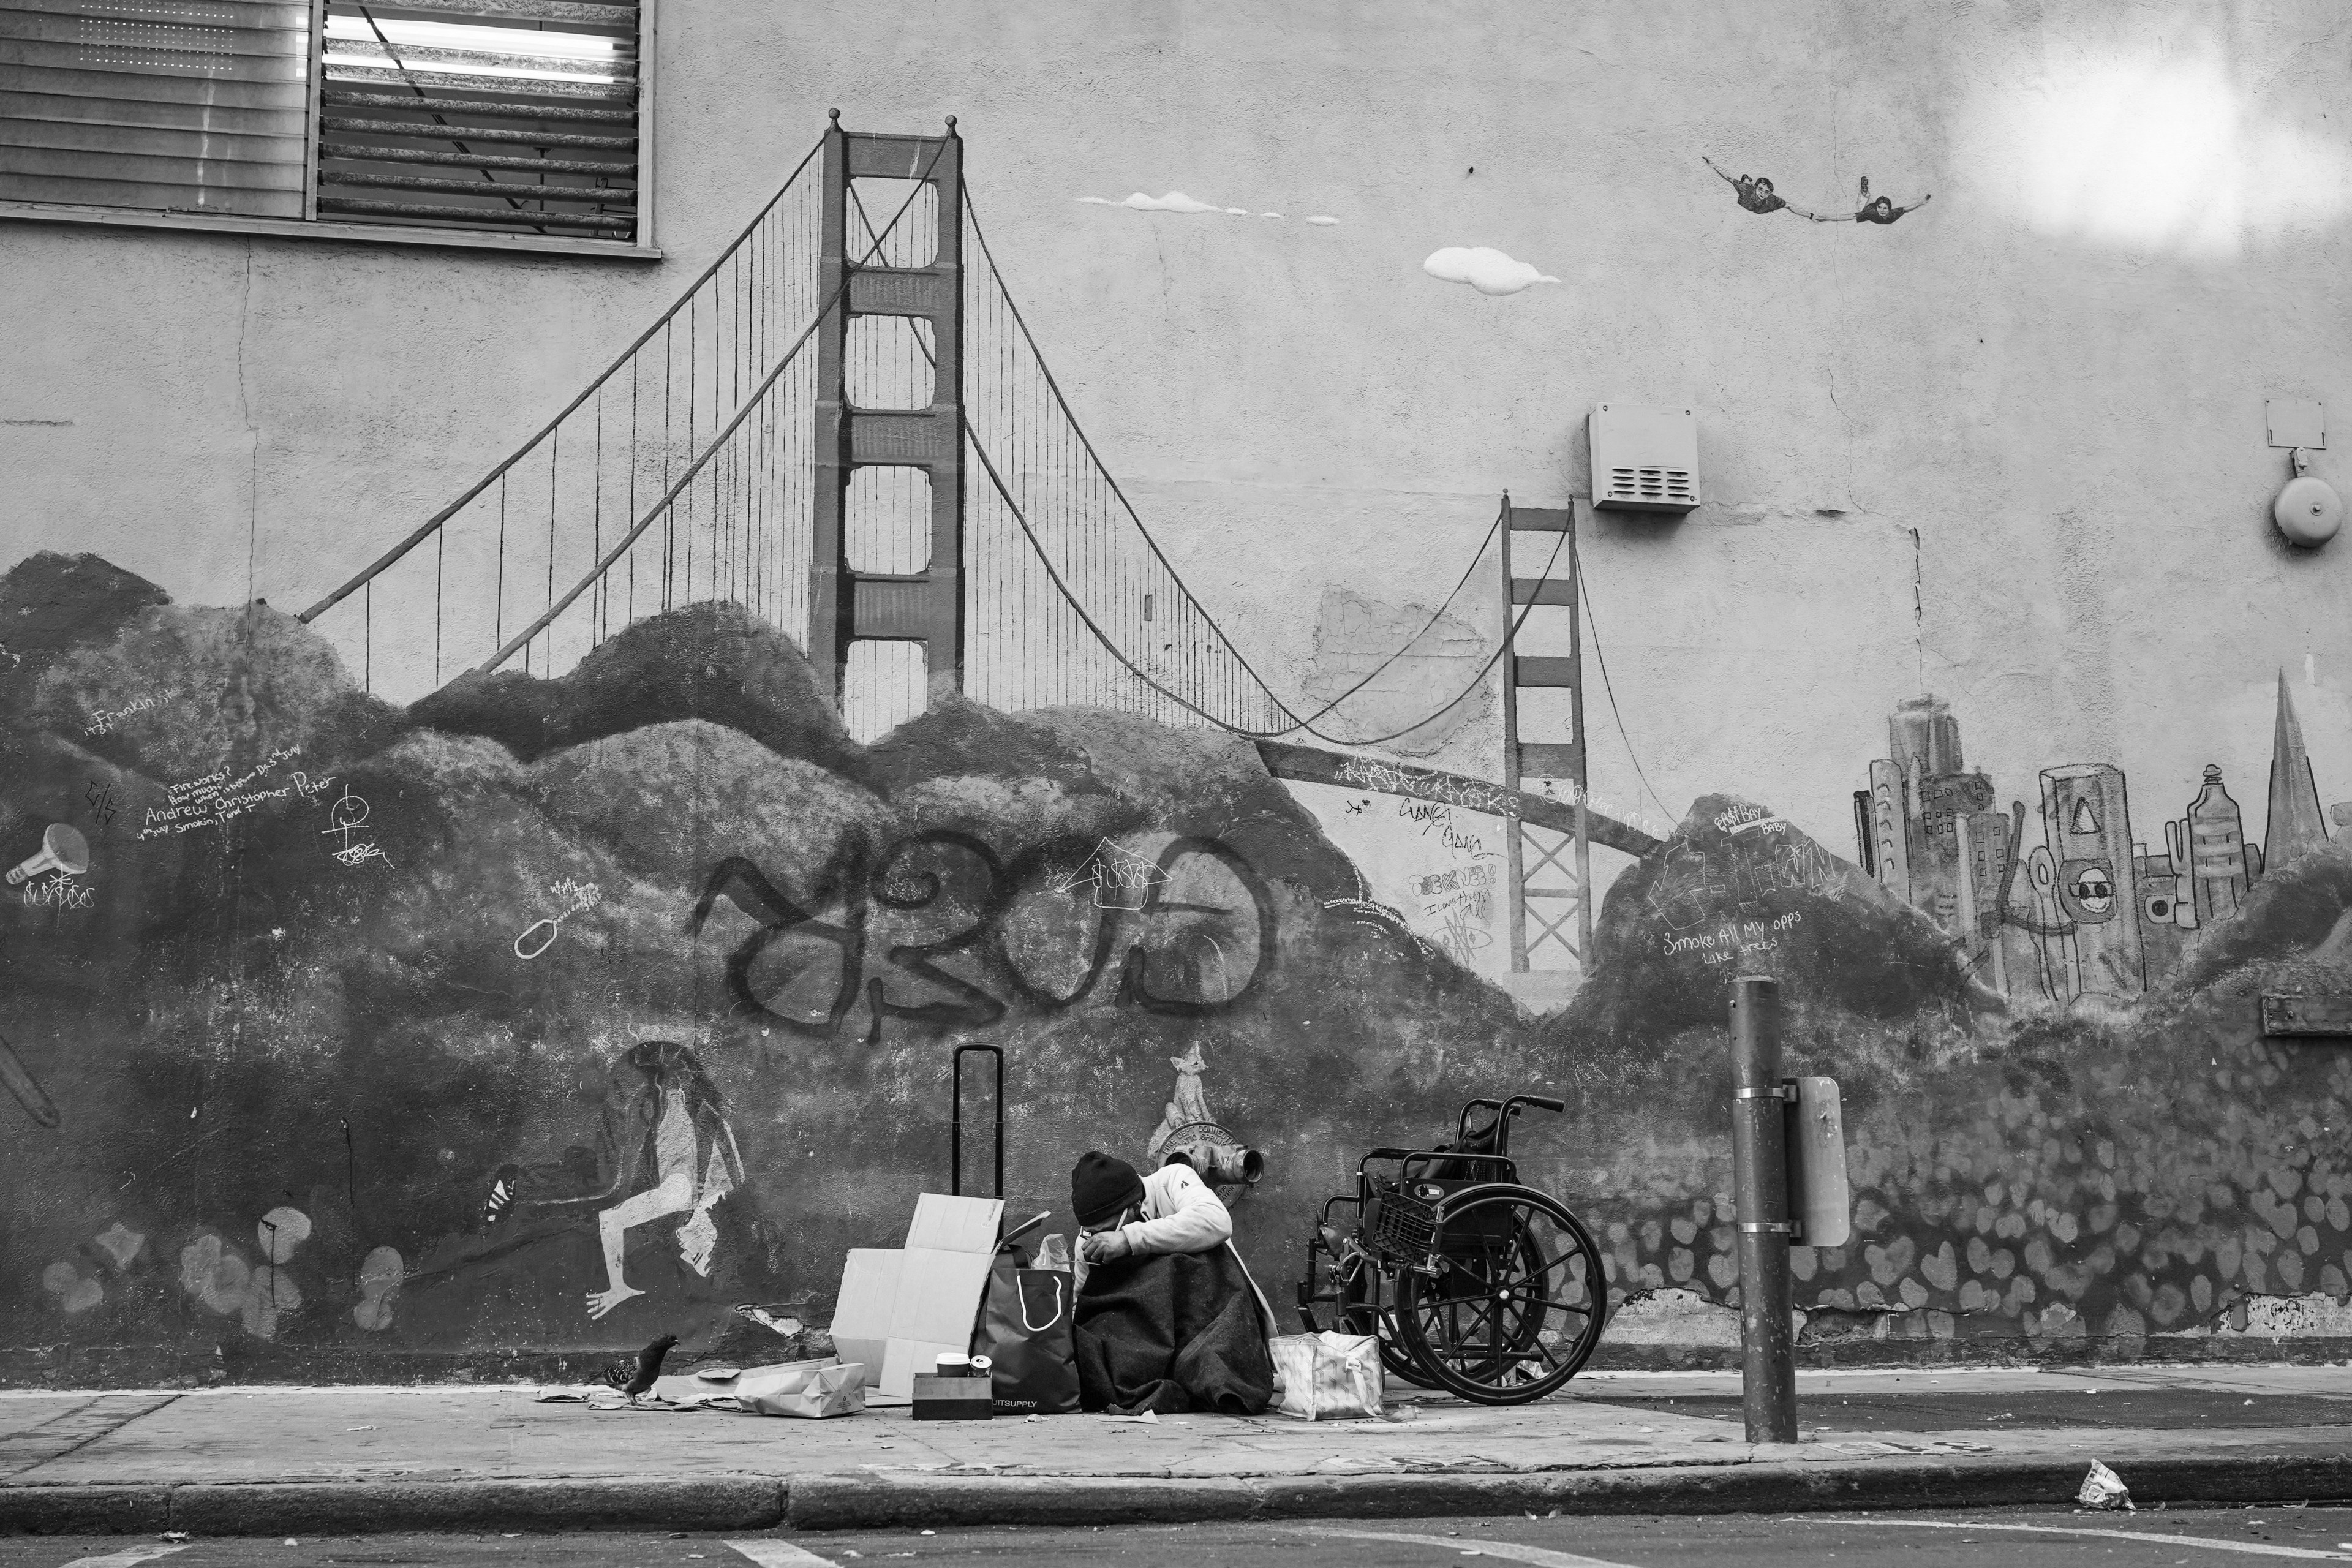 A black and white photo shows a person sitting by cardboard boxes on a sidewalk, with a mural of the Golden Gate Bridge and cityscape behind them.